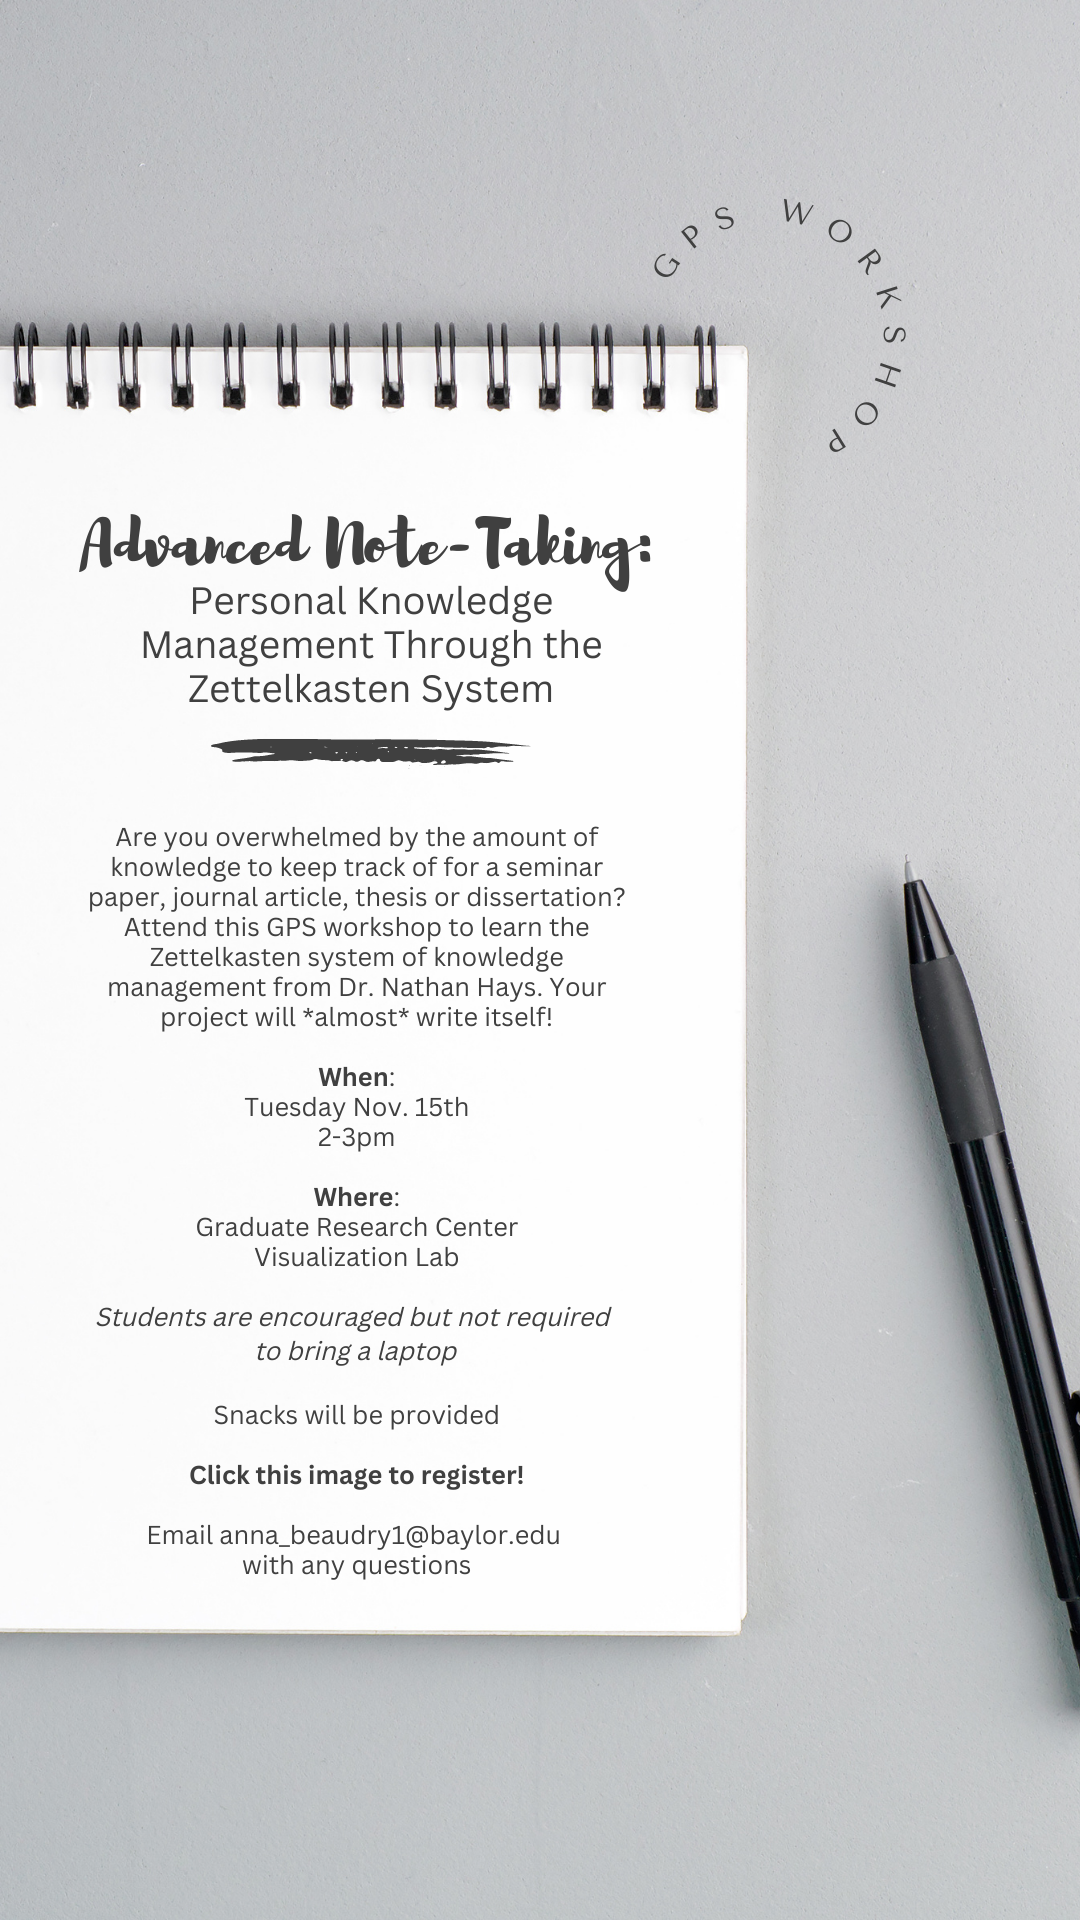 Advanced Note-Taking: Personal Knowledge Management Through the Zettlkasten System. Are you overwhelmed by the amount of knowledge to keep track of or a semester paper, journal article, thesis, or dissertation? Attend this GPS workshop to learn the Zettlkasten system of knowledge management from Dr. Nathan Hays. Your project will *almost* write itself! When: Tuesday, Nov. 15th, 2-3 pm. Where: Graduate Research Center, Visualization Lab. Students are encouraged but not required to bring a laptop. Snacks will be provided. Click this image to register! Email anna_beaudry1@baylor.edu with any questions.